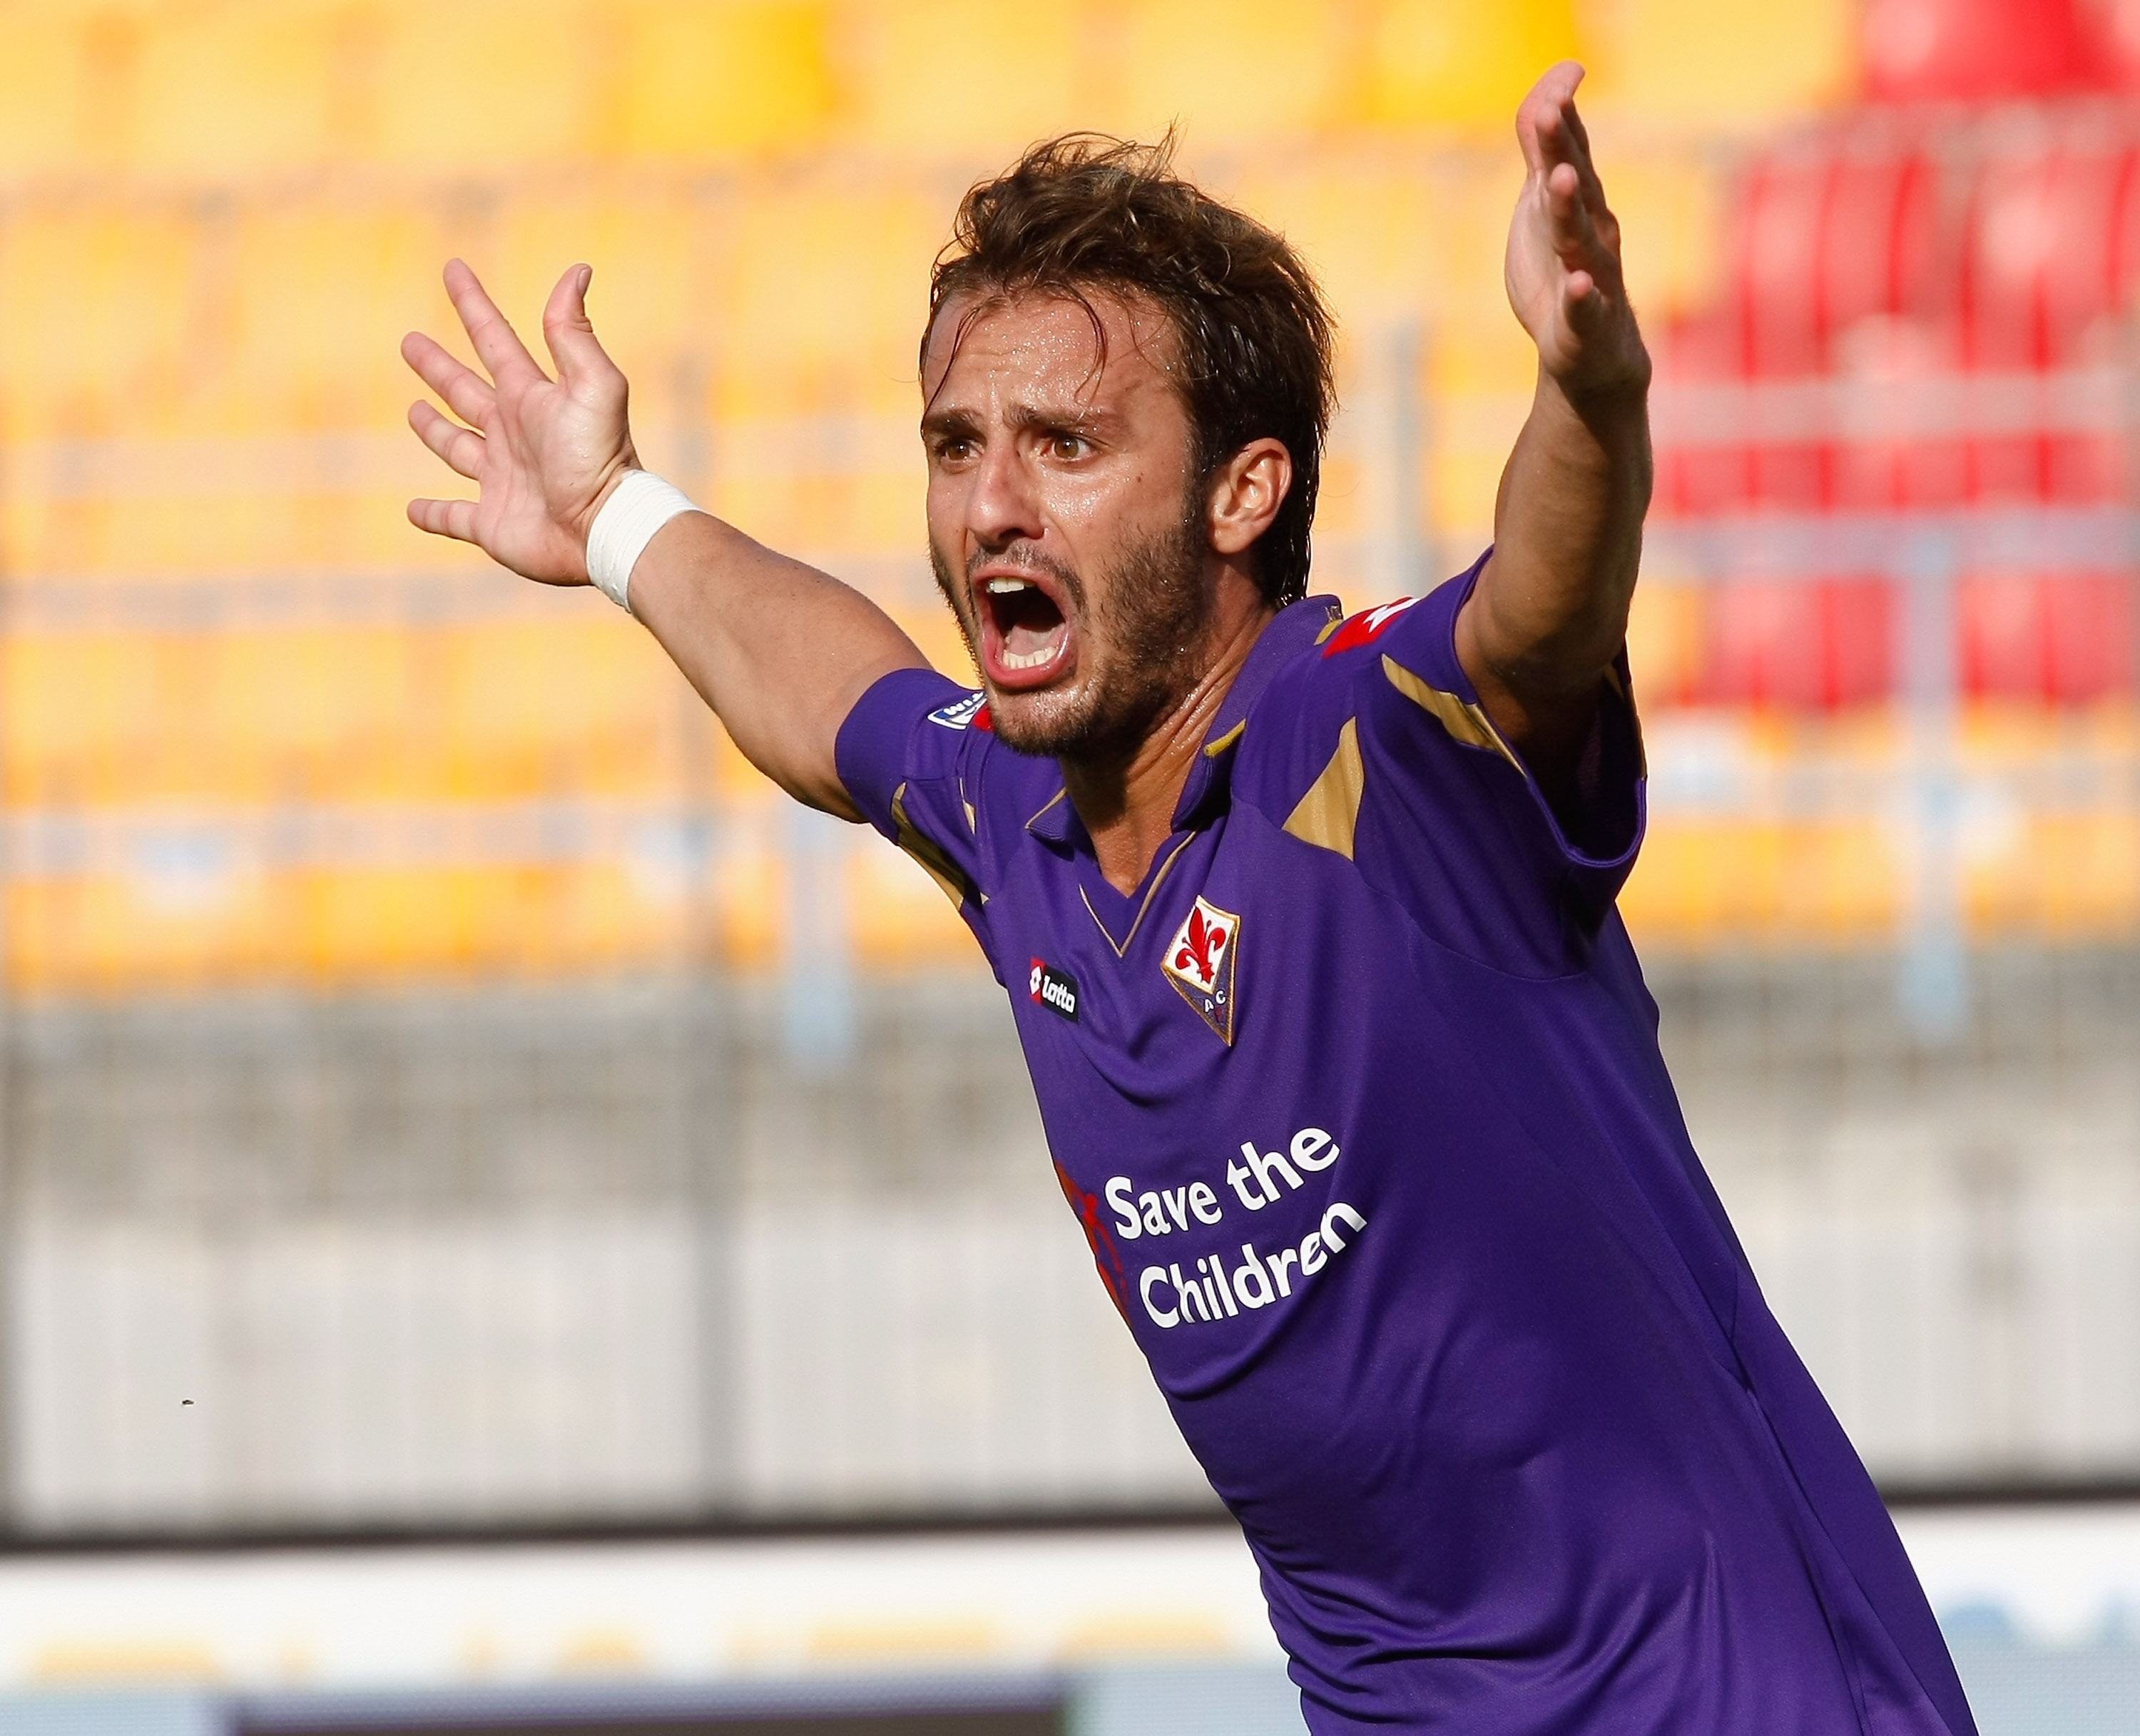 LECCE, ITALY - SEPTEMBER 12:  Alberto Gilardino of ACF Fiorentina gestures during the Serie A match between Lecce and Fiorentina at Stadio Via del Mare on September 12, 2010 in Lecce, Italy.  (Photo by Maurizio Lagana/Getty Images)